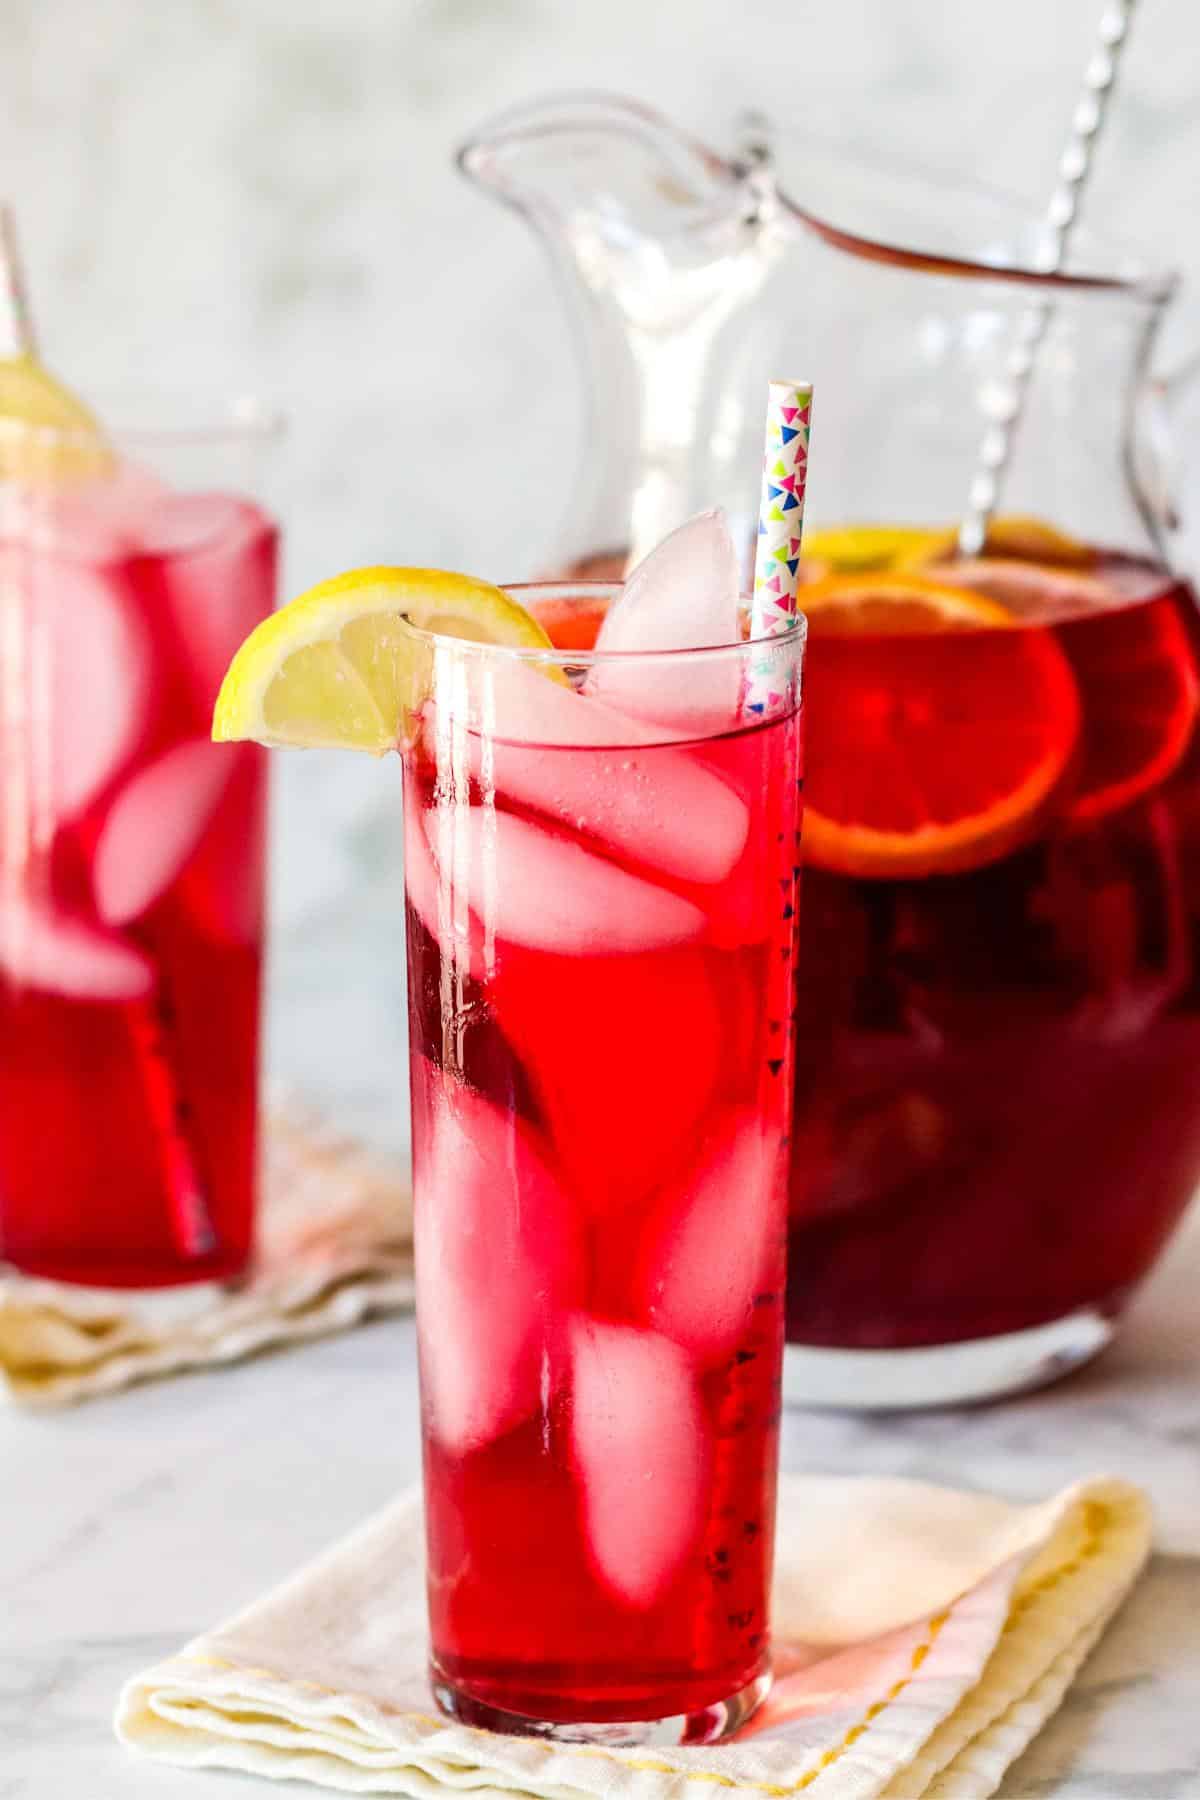 Glasses of spiked iced tea cocktails and a pitcher of tea.